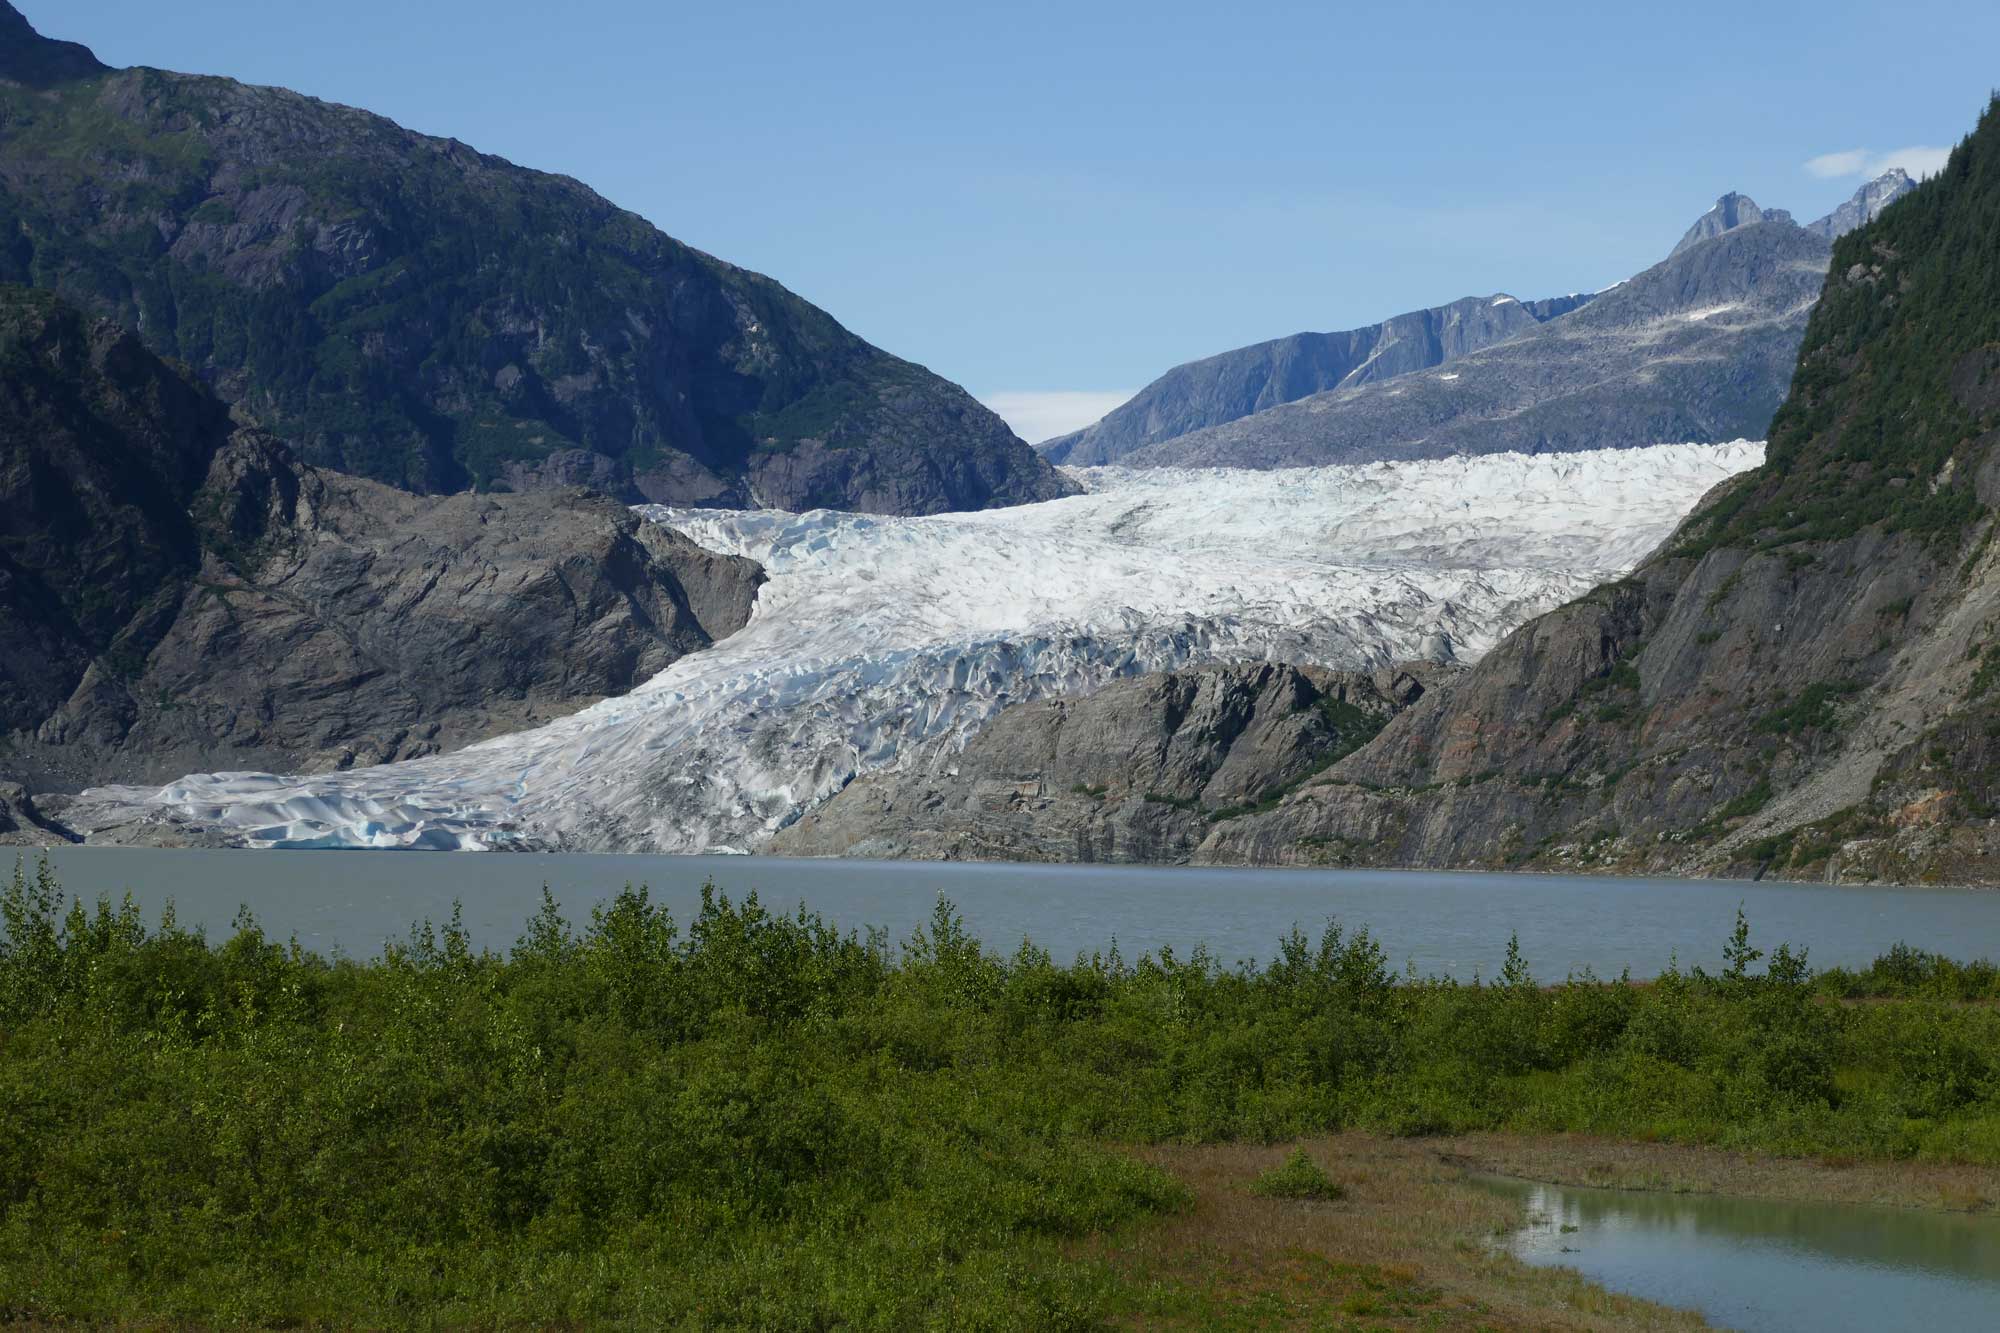 Photograph of Mendenhall Glacier, southeastern Alaska. The photo shows a glacier flowing down a rocky slope and into a lake. Vegetation grows on the shore opposite the glacier.